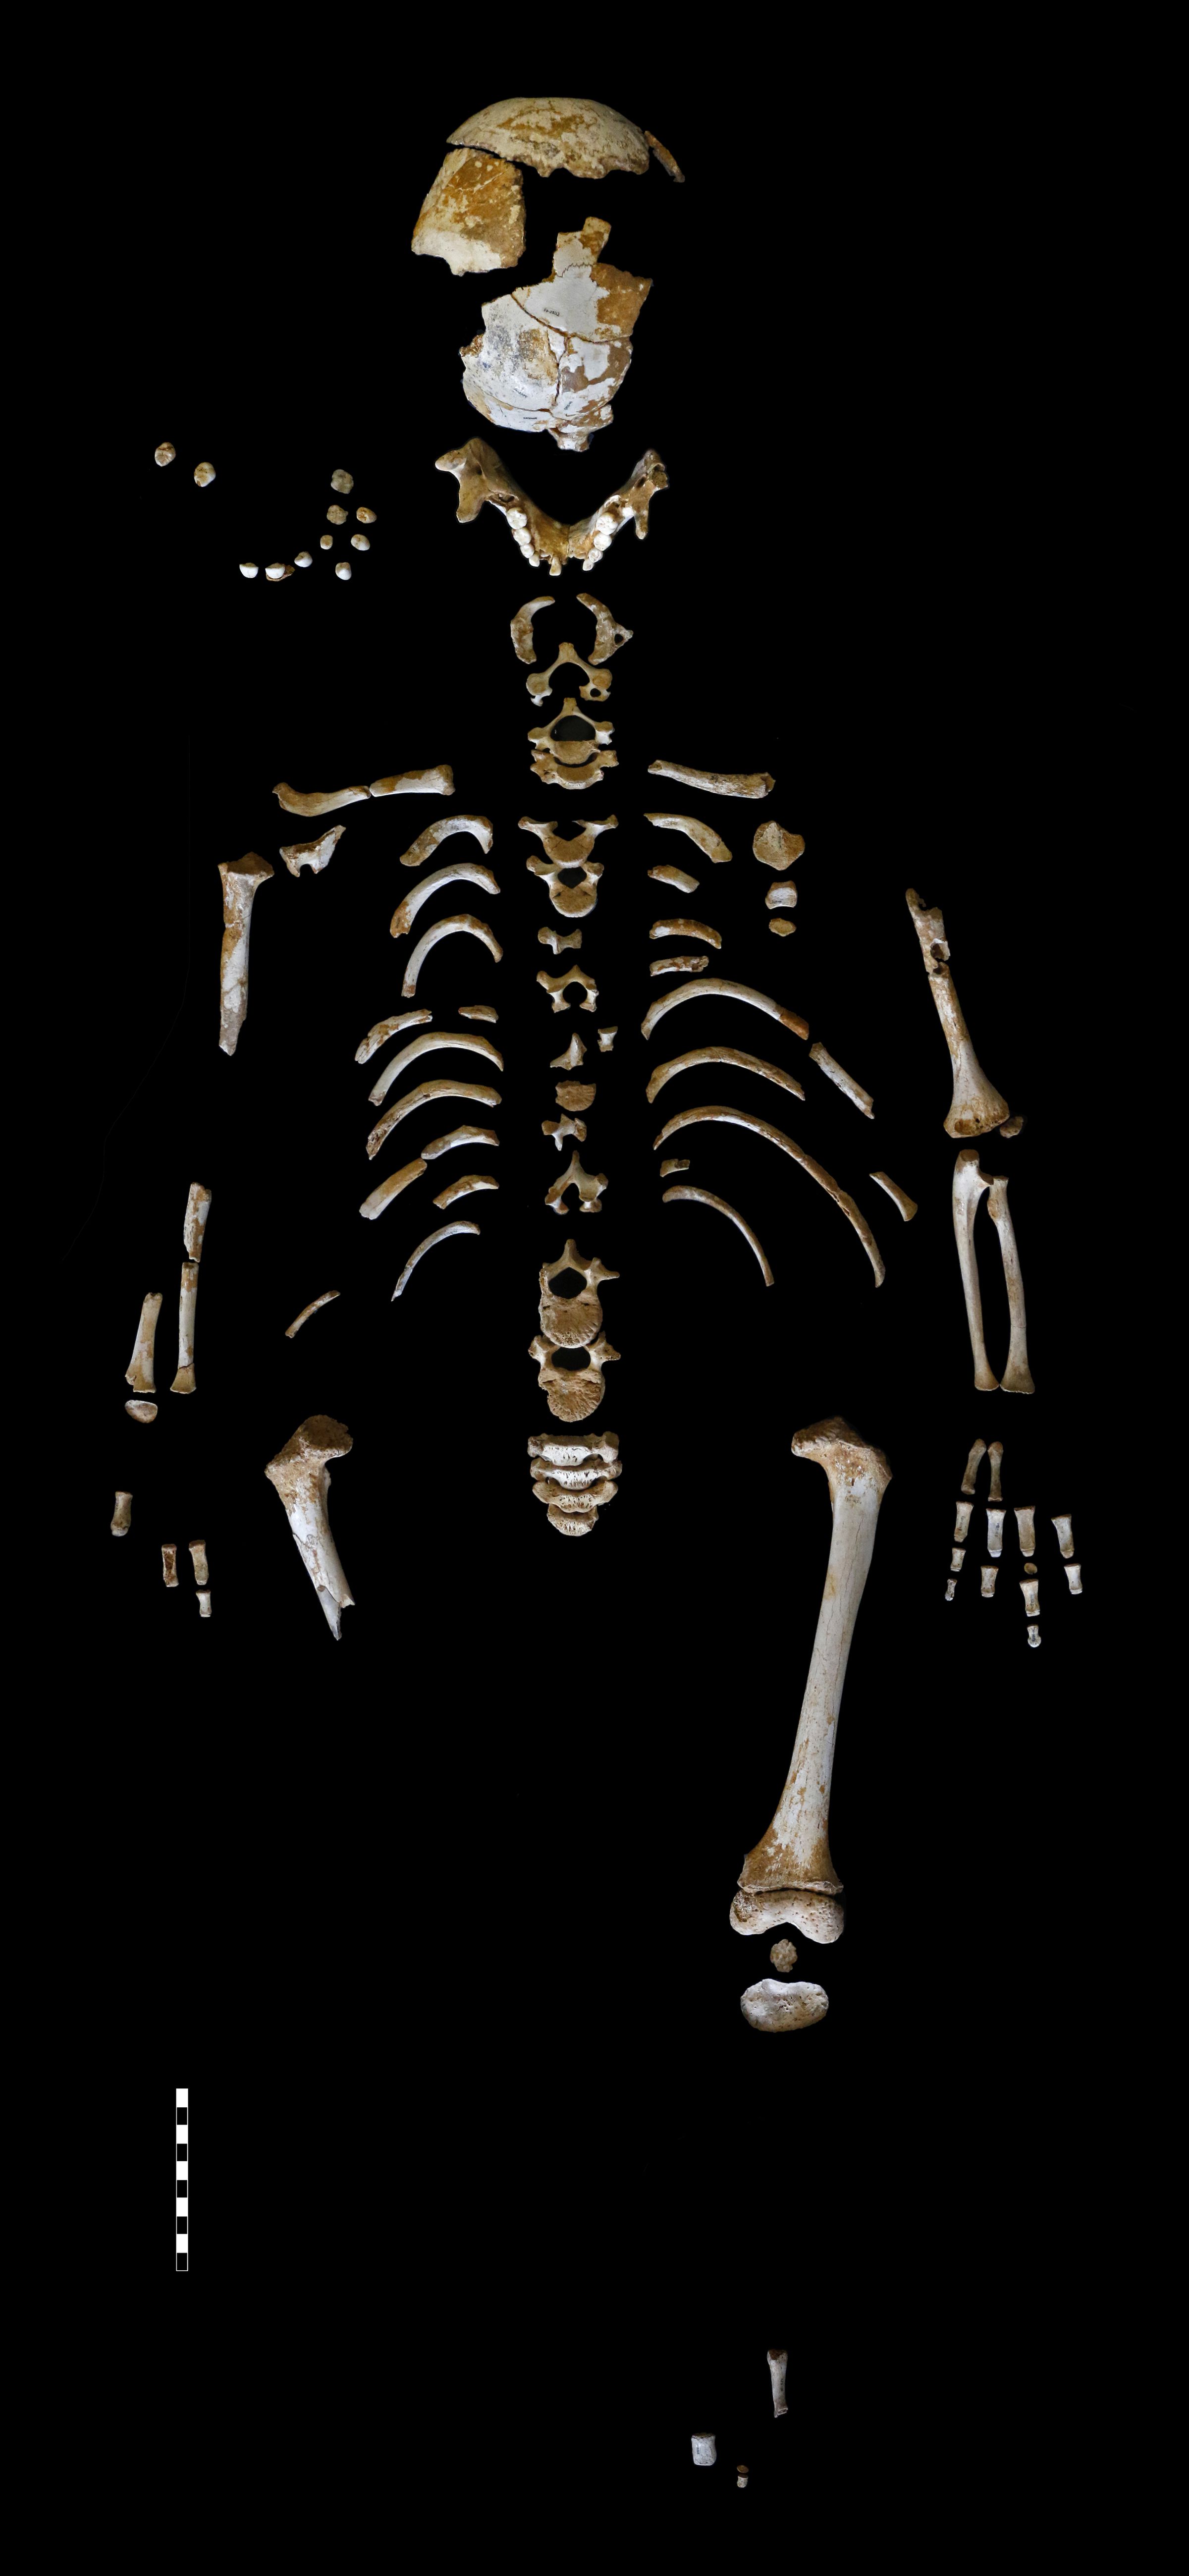 Skeleton of the Neanderthal boy recovered from the El Sidrón cave in Spain.